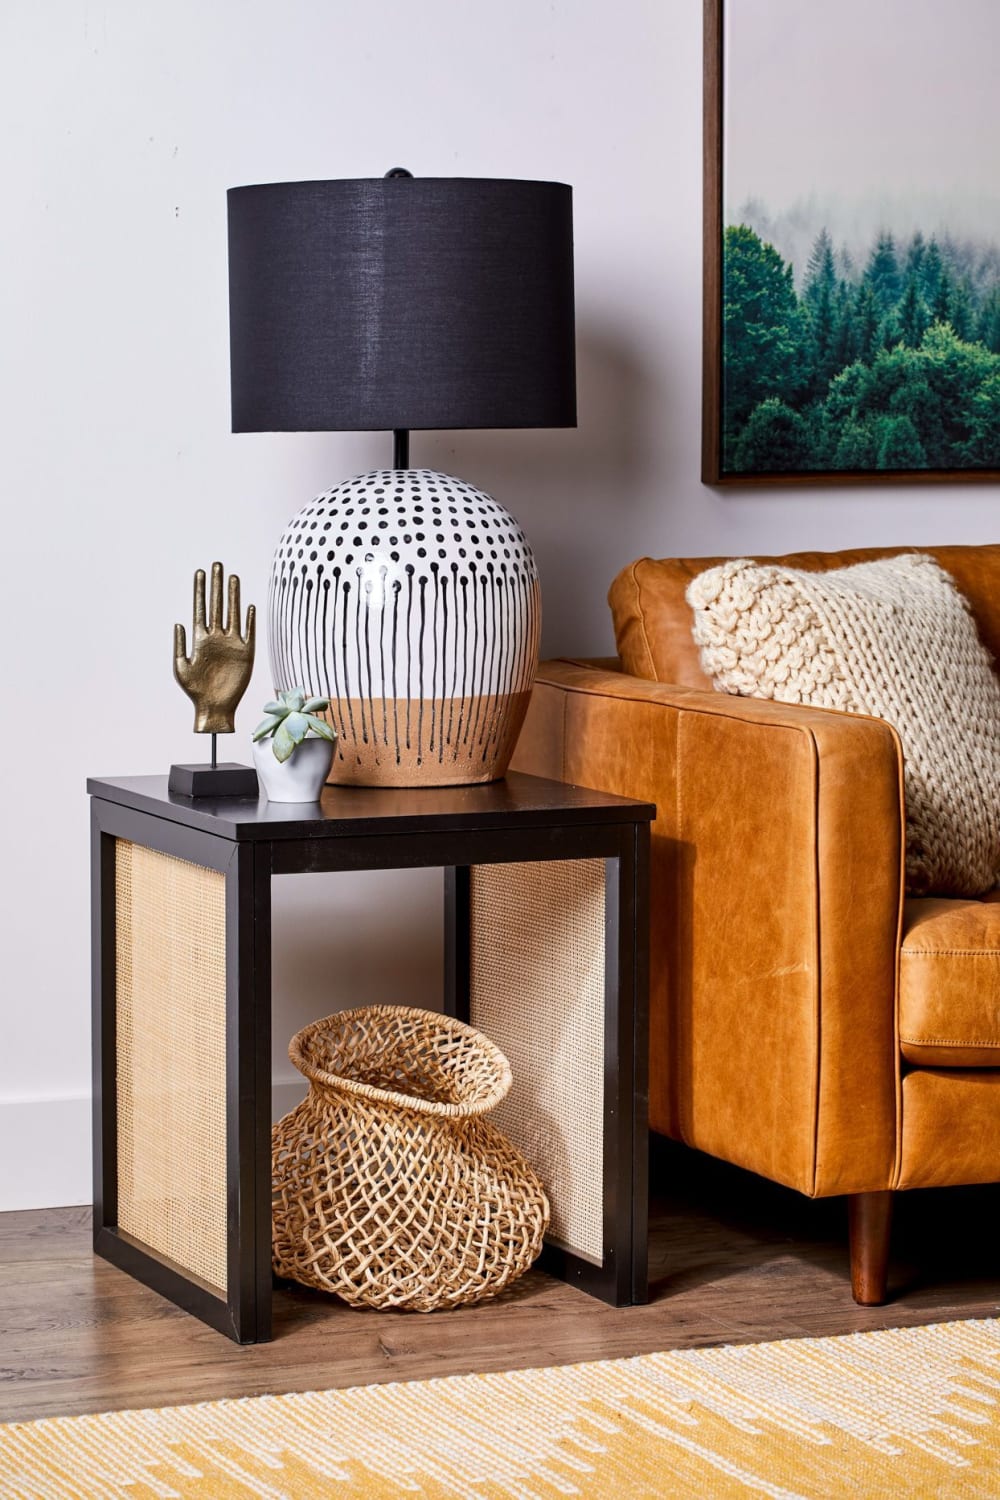 24 DIY Furniture Projects with One-of-a-Kind Style